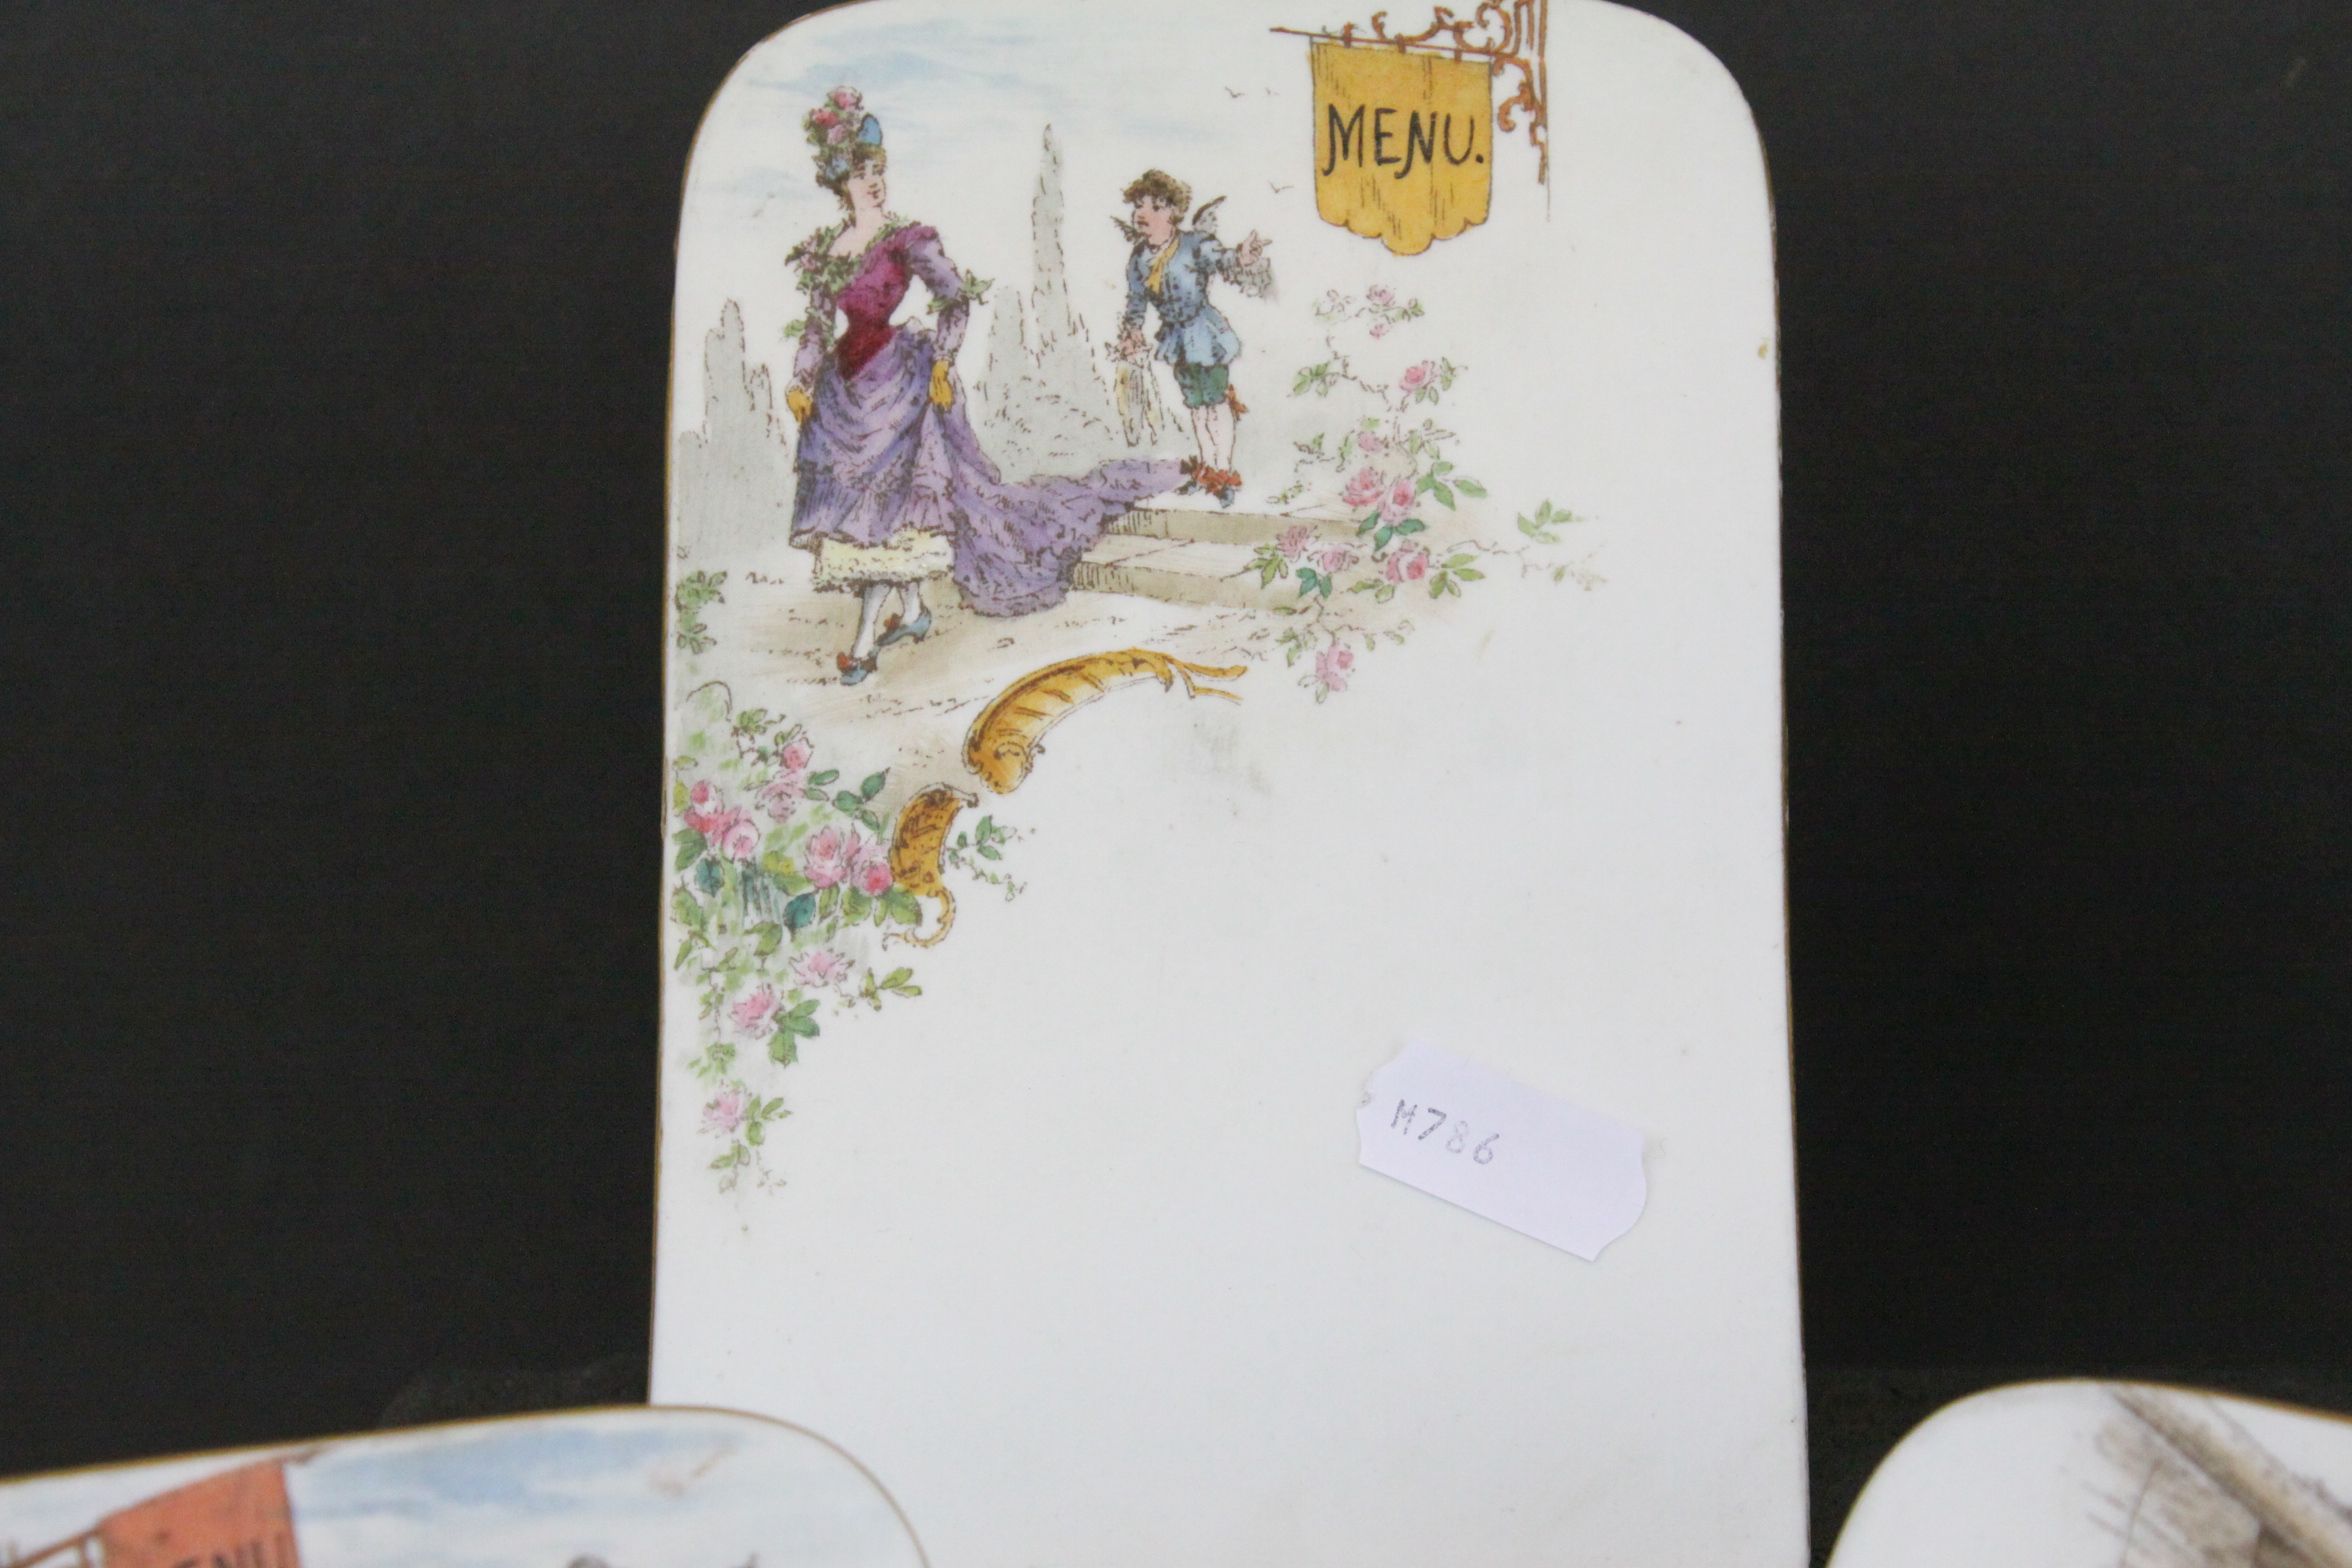 Set of Three 19th century Porcelain Menu Plaques with Easel Backs, each with a different hand - Image 2 of 9